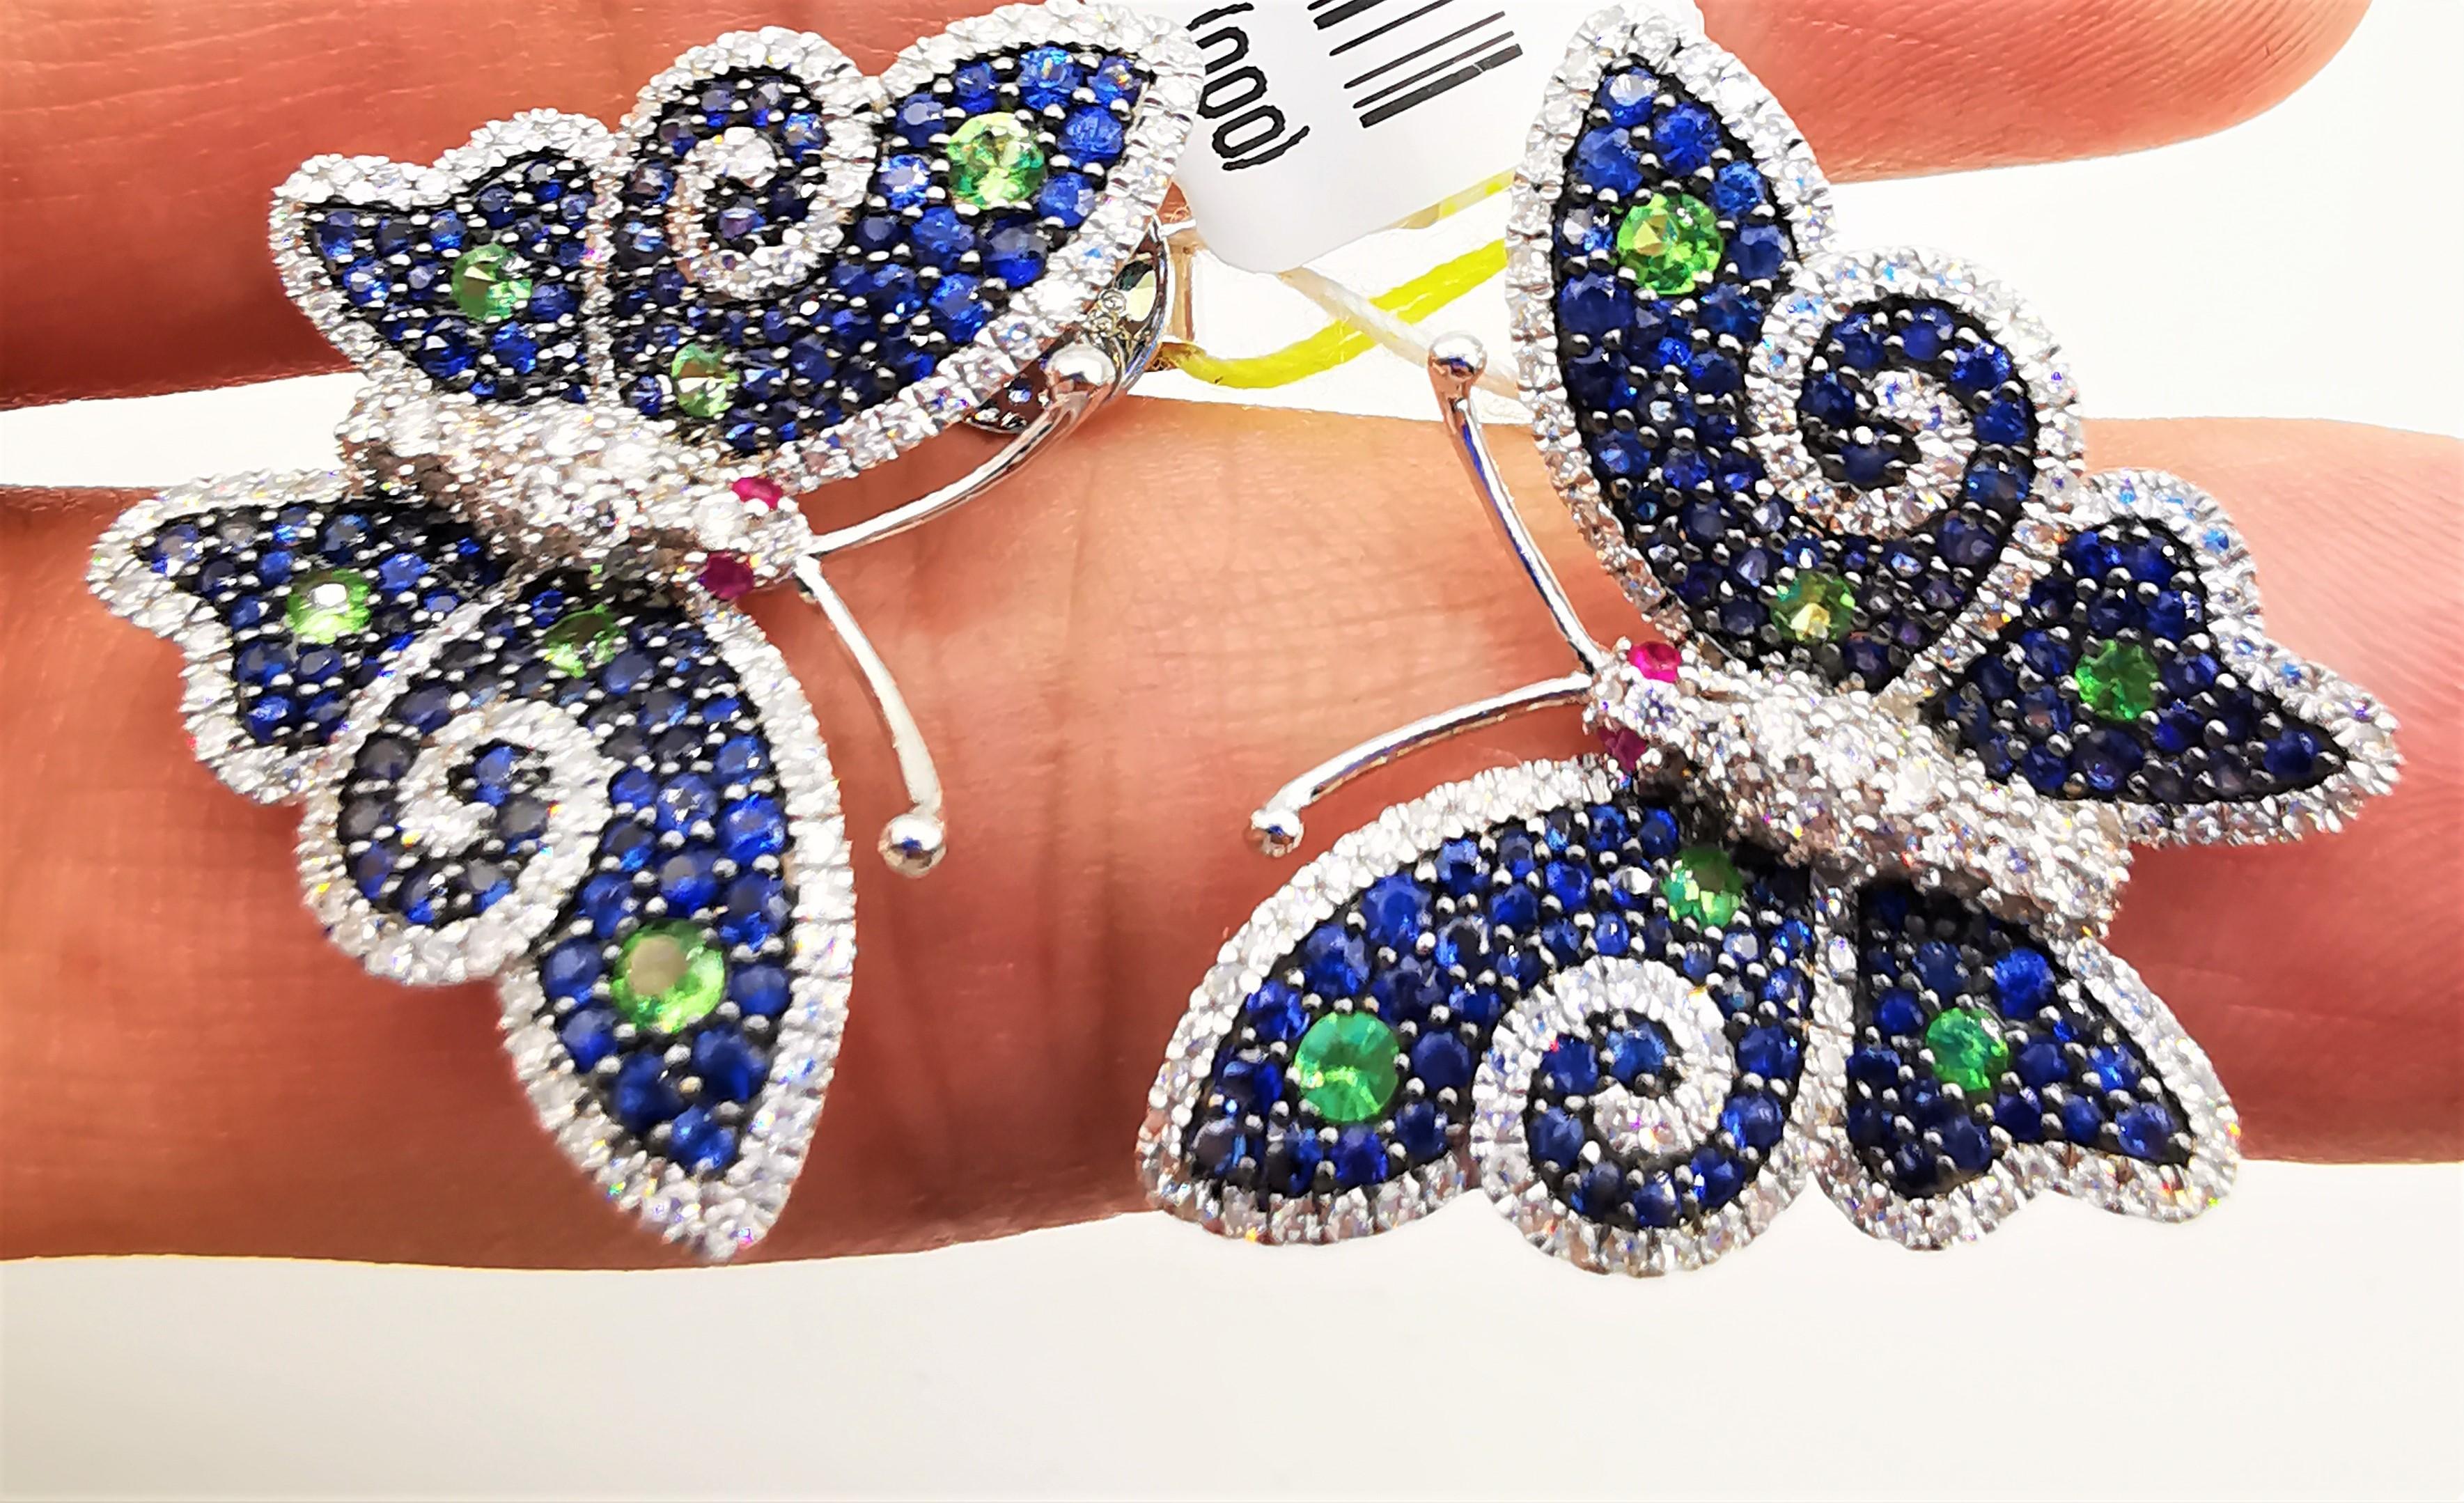 
The Following Items we are offering is a Rare Important Radiant 18KT Yellow Gold and 18KT Gold Gorgeous Glittering Blue Sapphire and Tsavorite Butterfly Diamond Earrings. Earrings Feature Gorgeous Colorful Blue Sapphires adorned with Spectacular